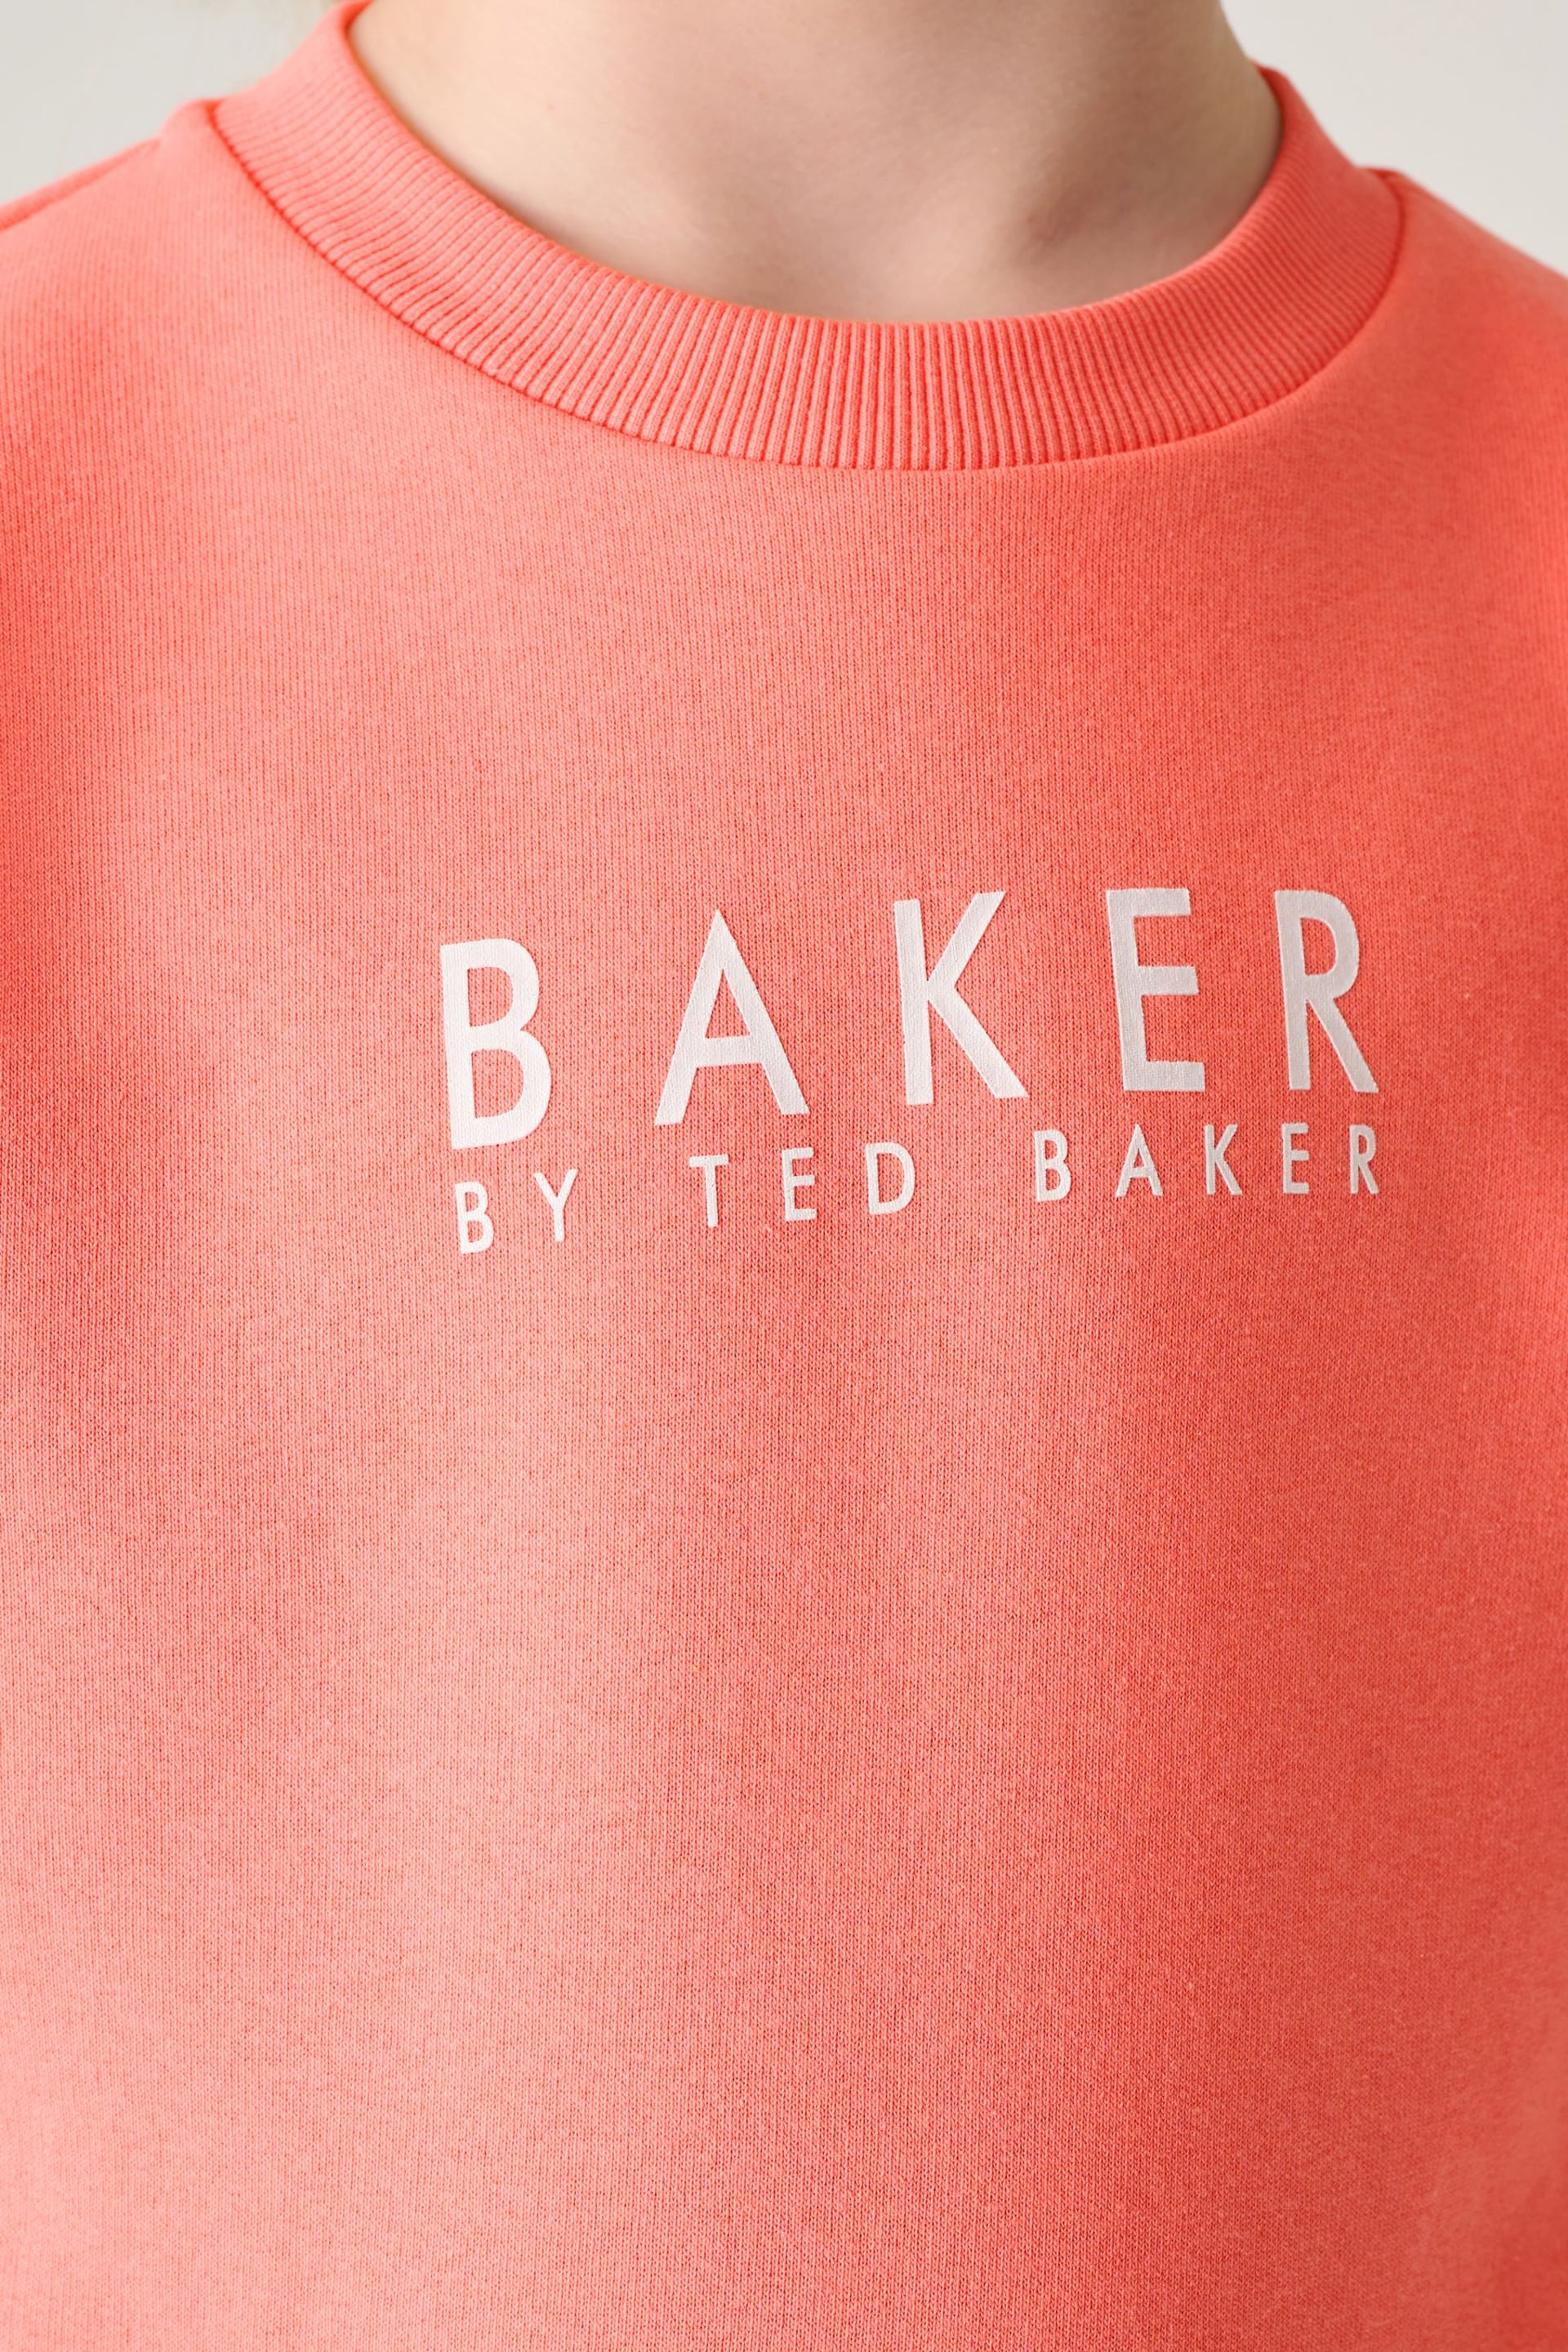 Baker by Ted Baker Apricot Sweater And Cycling Shorts Set - Image 6 of 10